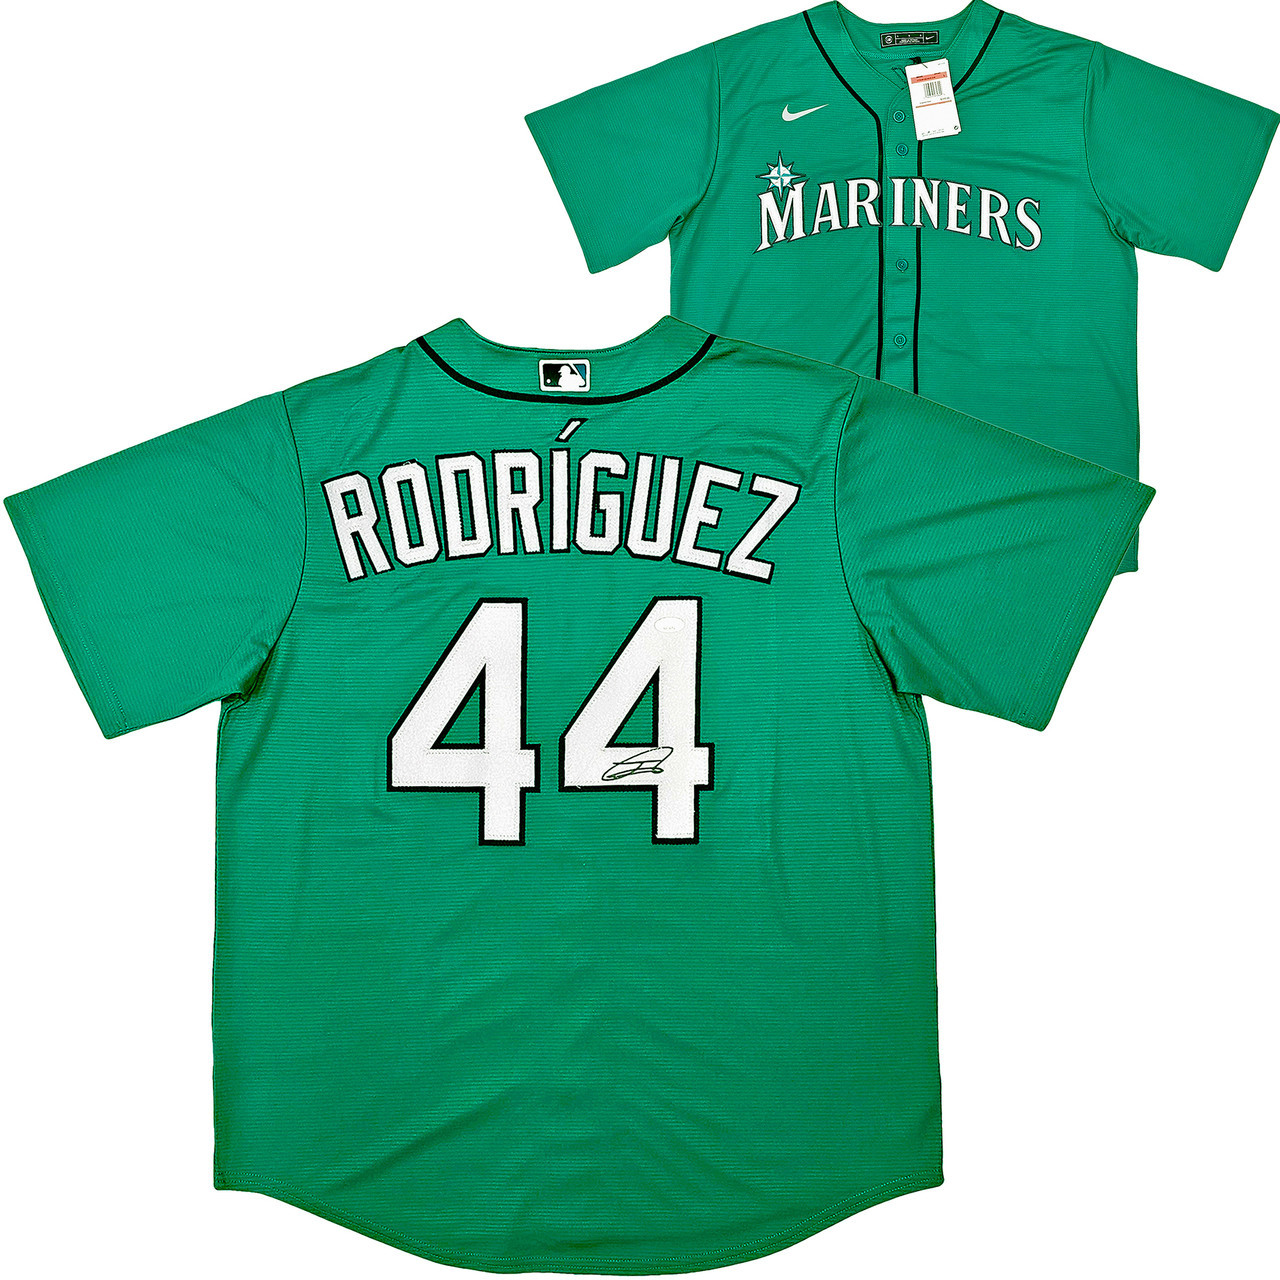 Seattle Mariners Julio Rodriguez Autographed Teal Nike Jersey Size